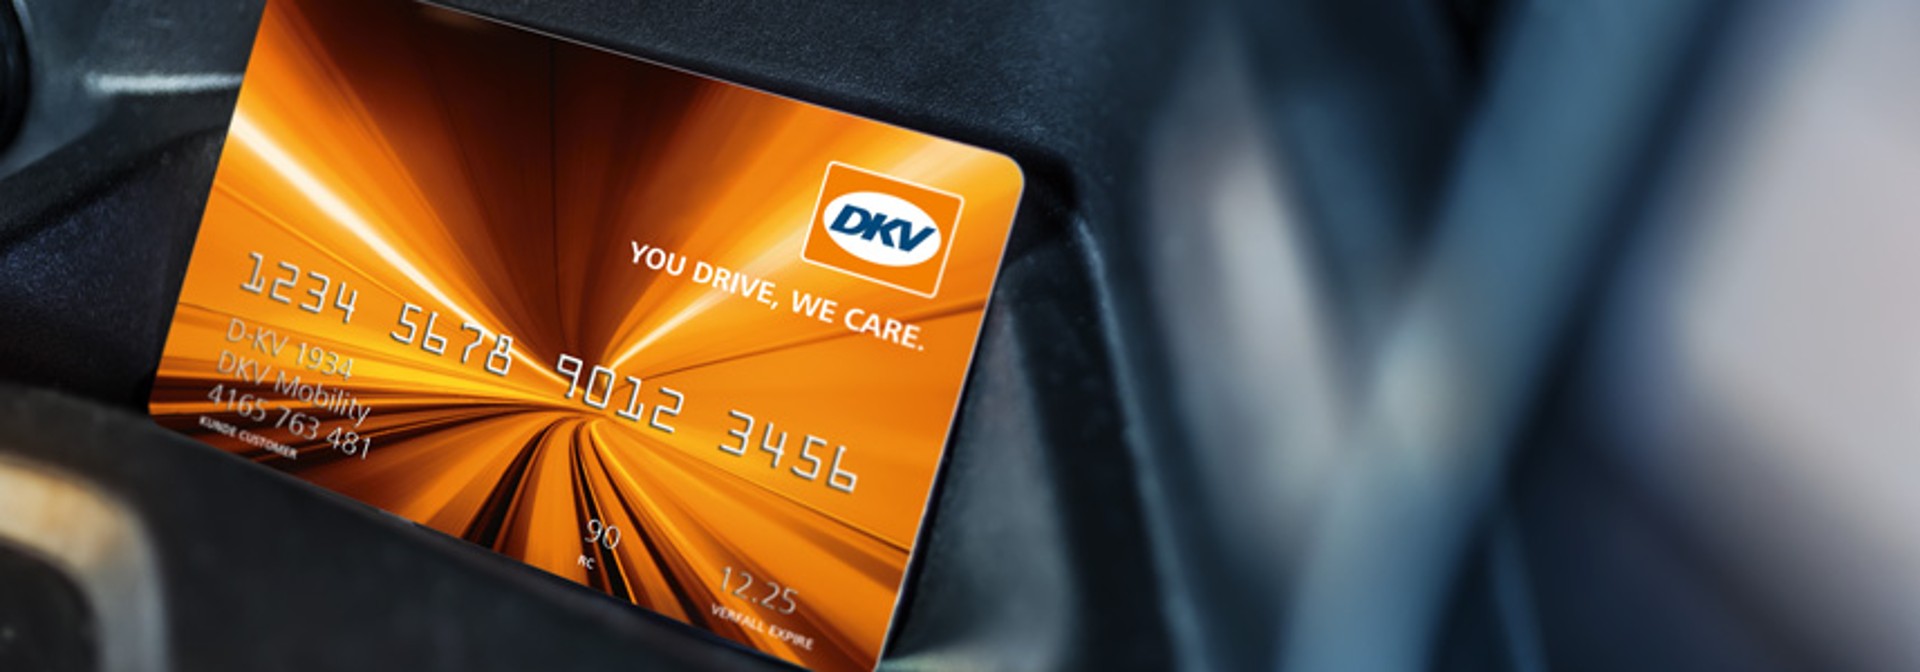 Easy Payment with DKV CARD.